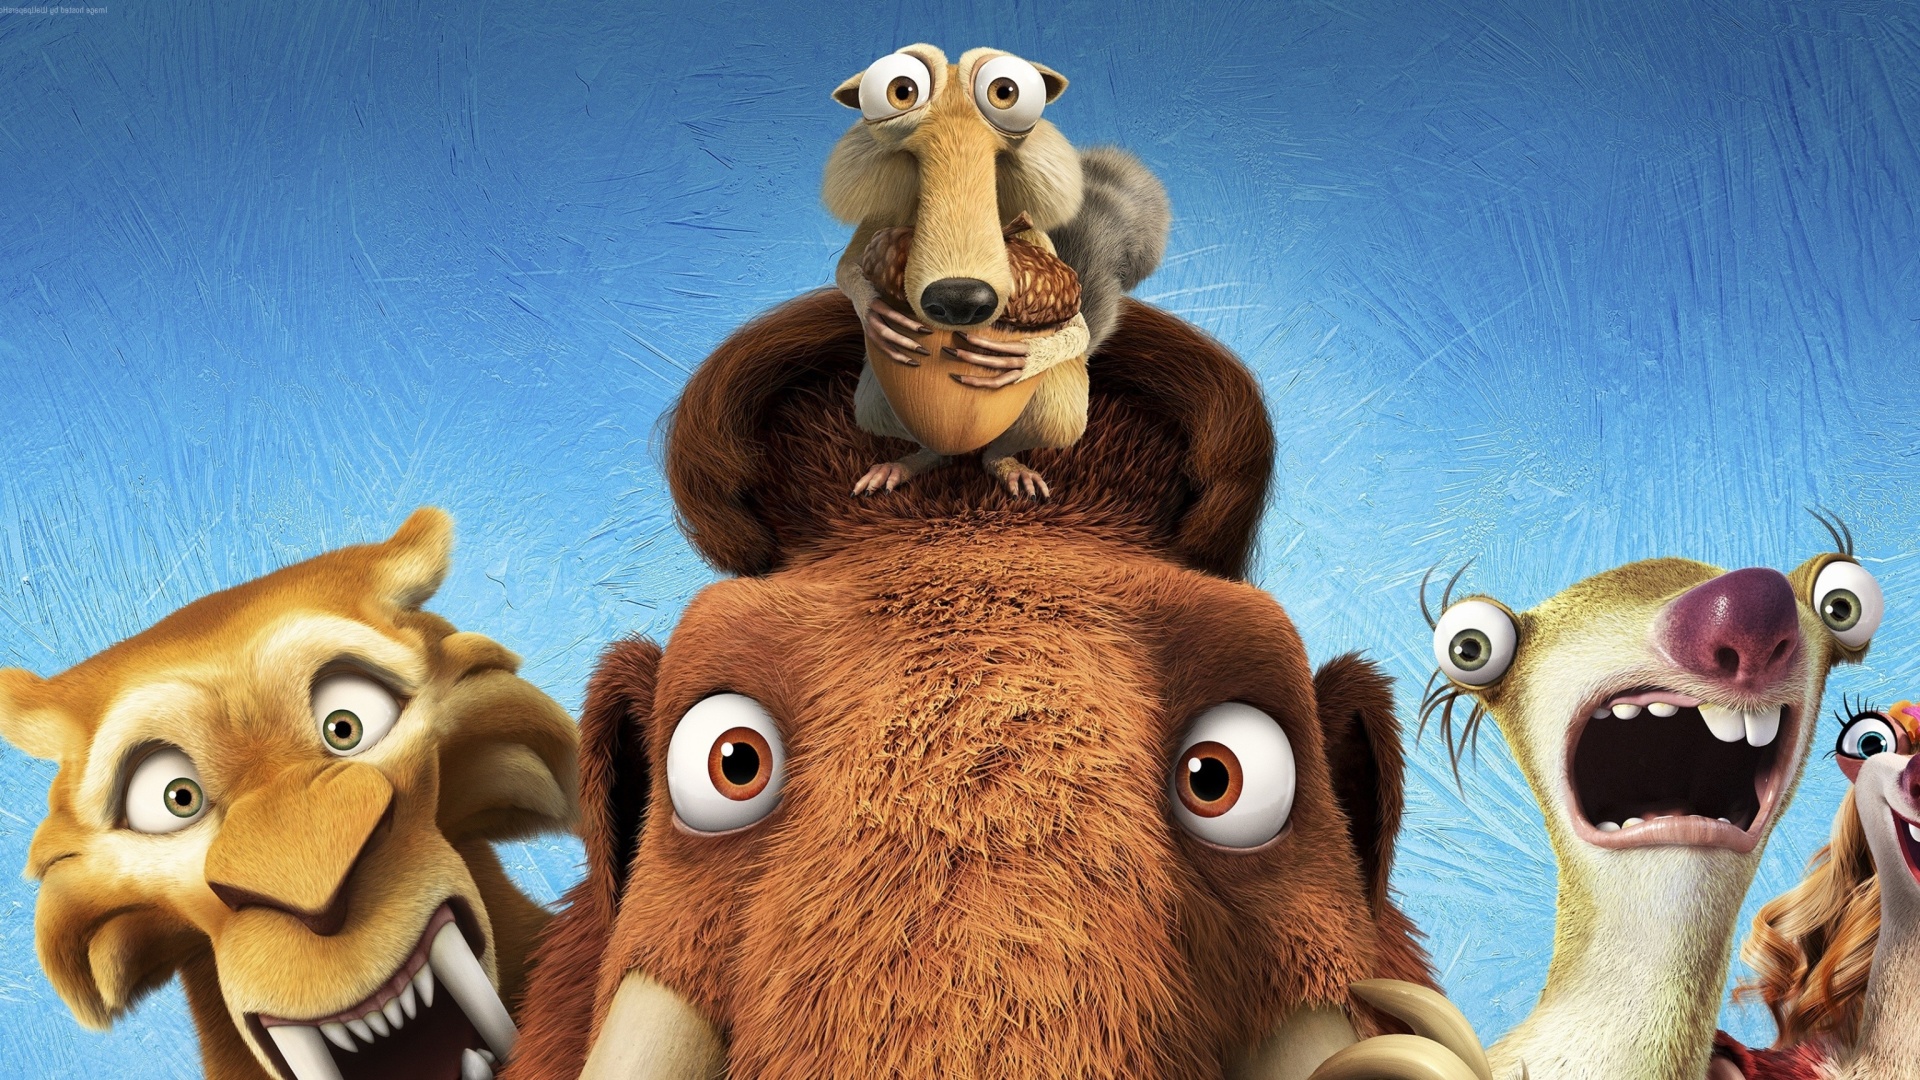 Ice Age 5 Collision Course with Diego, Manny, Scrat, Sid, Mammoths screenshot #1 1920x1080